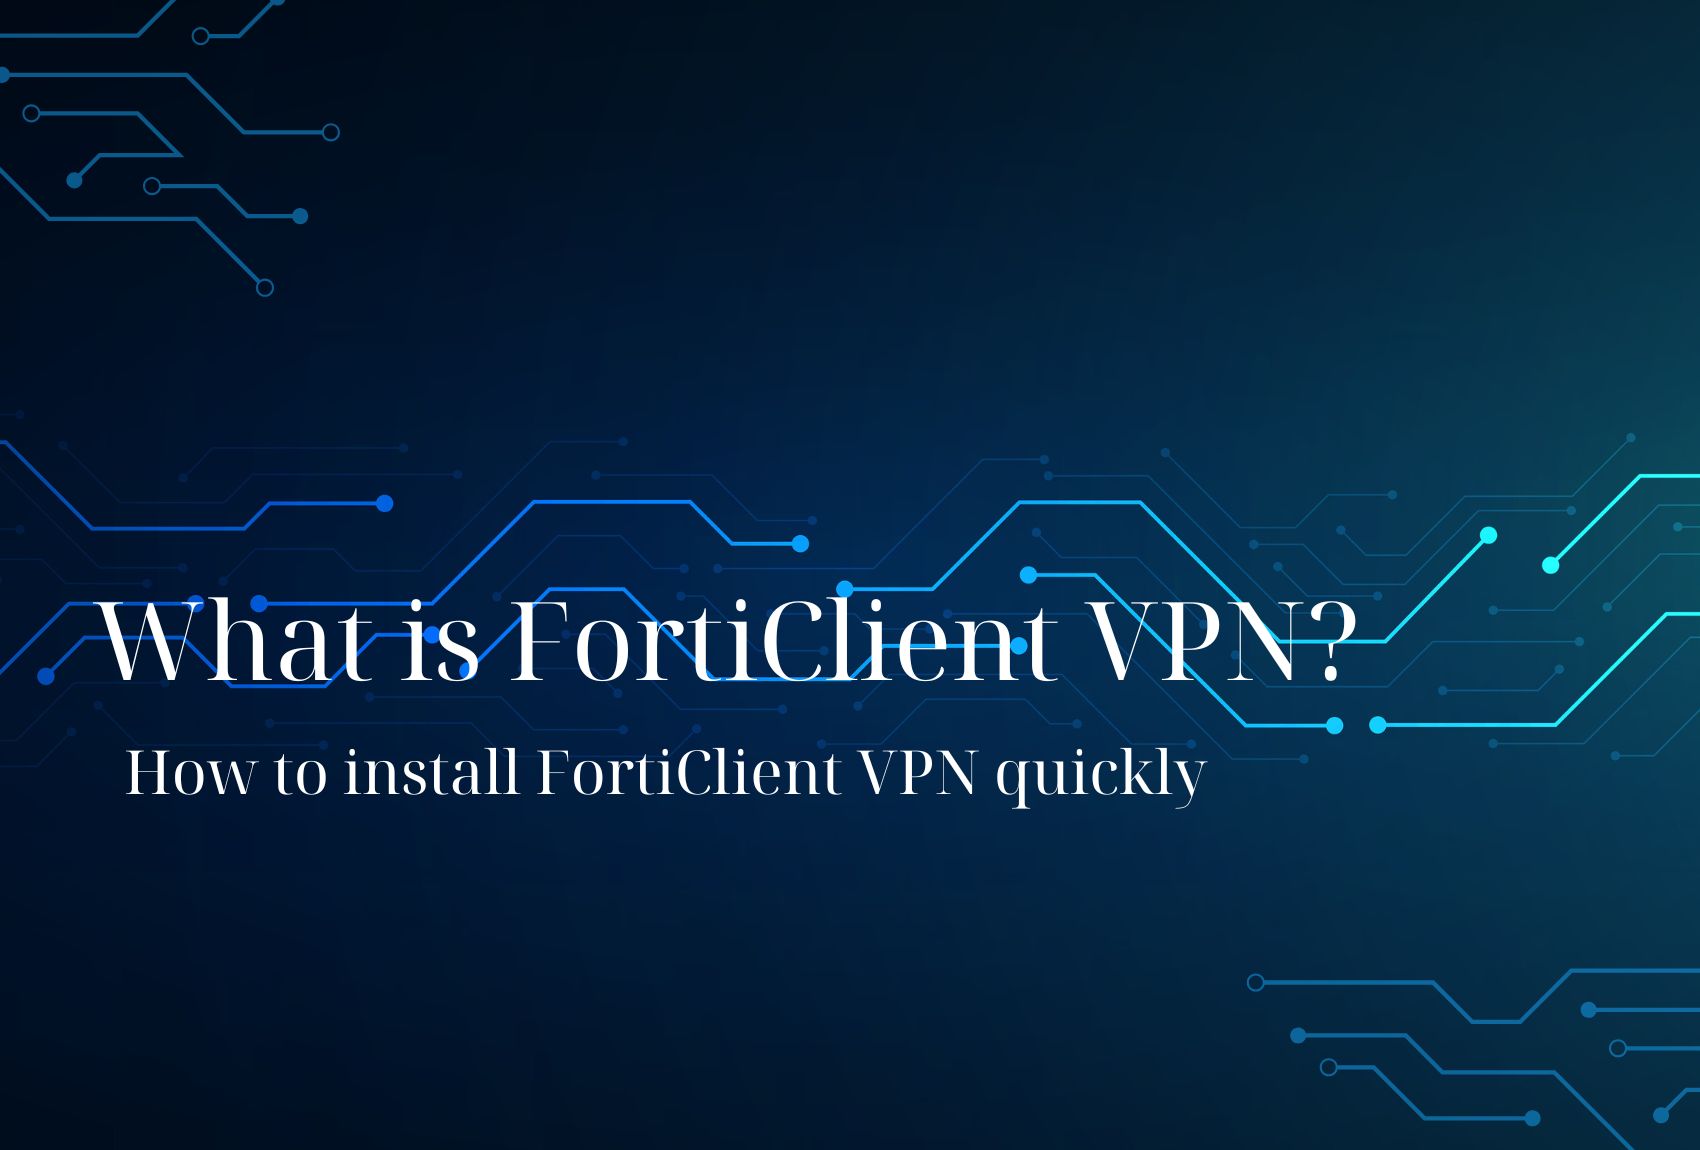 What is FortiClient VPN? How to install FortiClient VPN quickly